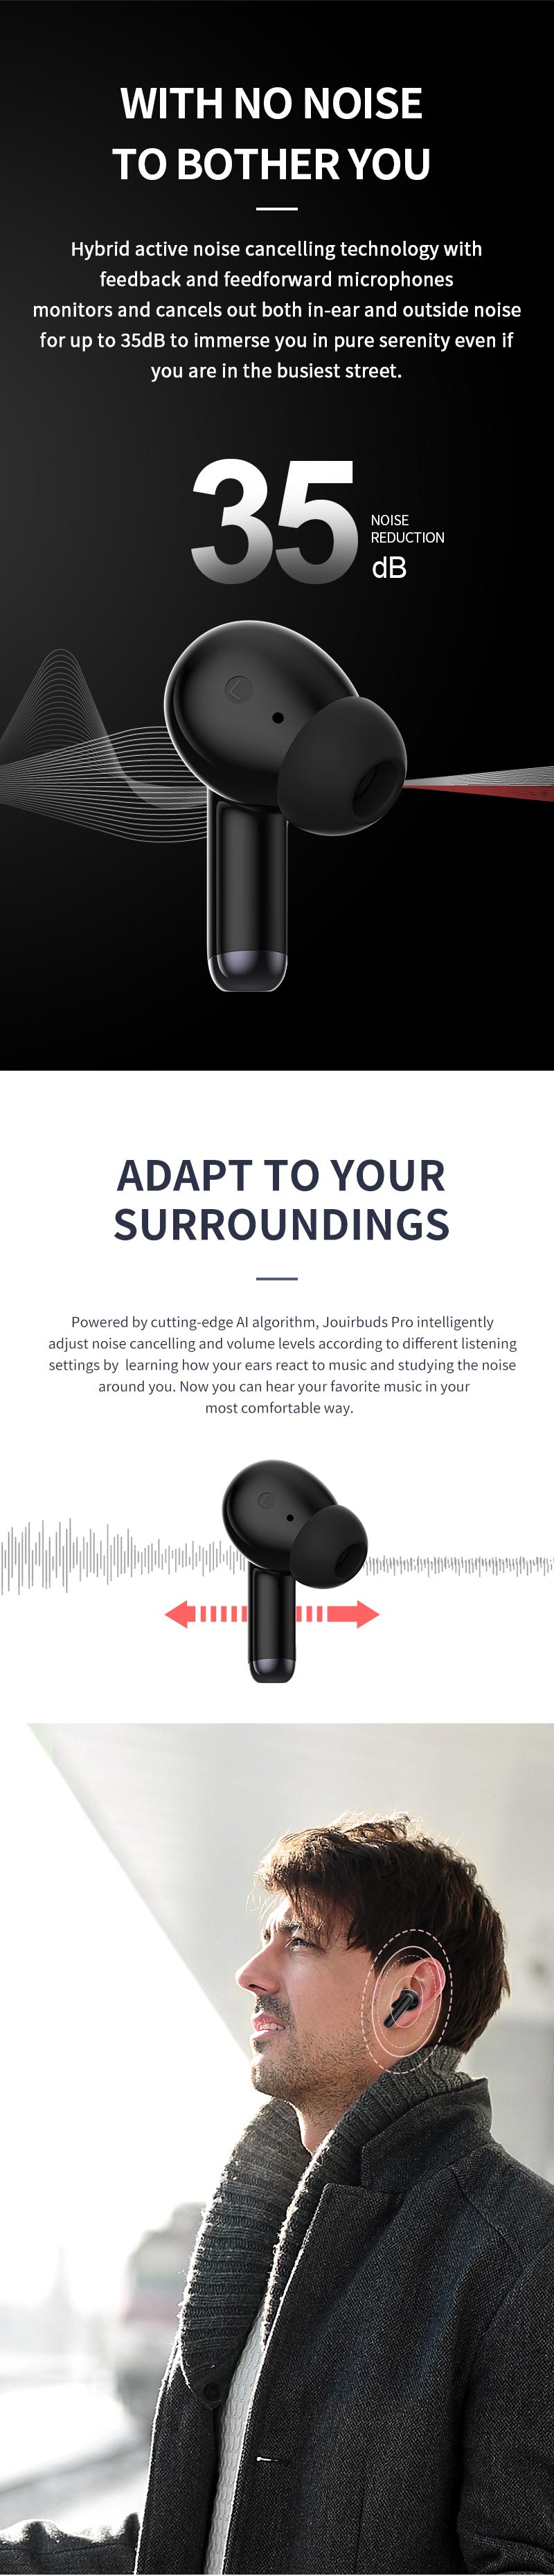 MoreJoy-MJ141Black-Jouirbuds-Pro-Hybrid-ANC-Wireless-Earbuds-Active-Noise-Cancelling-Headphones-Bluetooth-5-2-Stereo-in-Ear-Earphones-Immersive-Sound-33